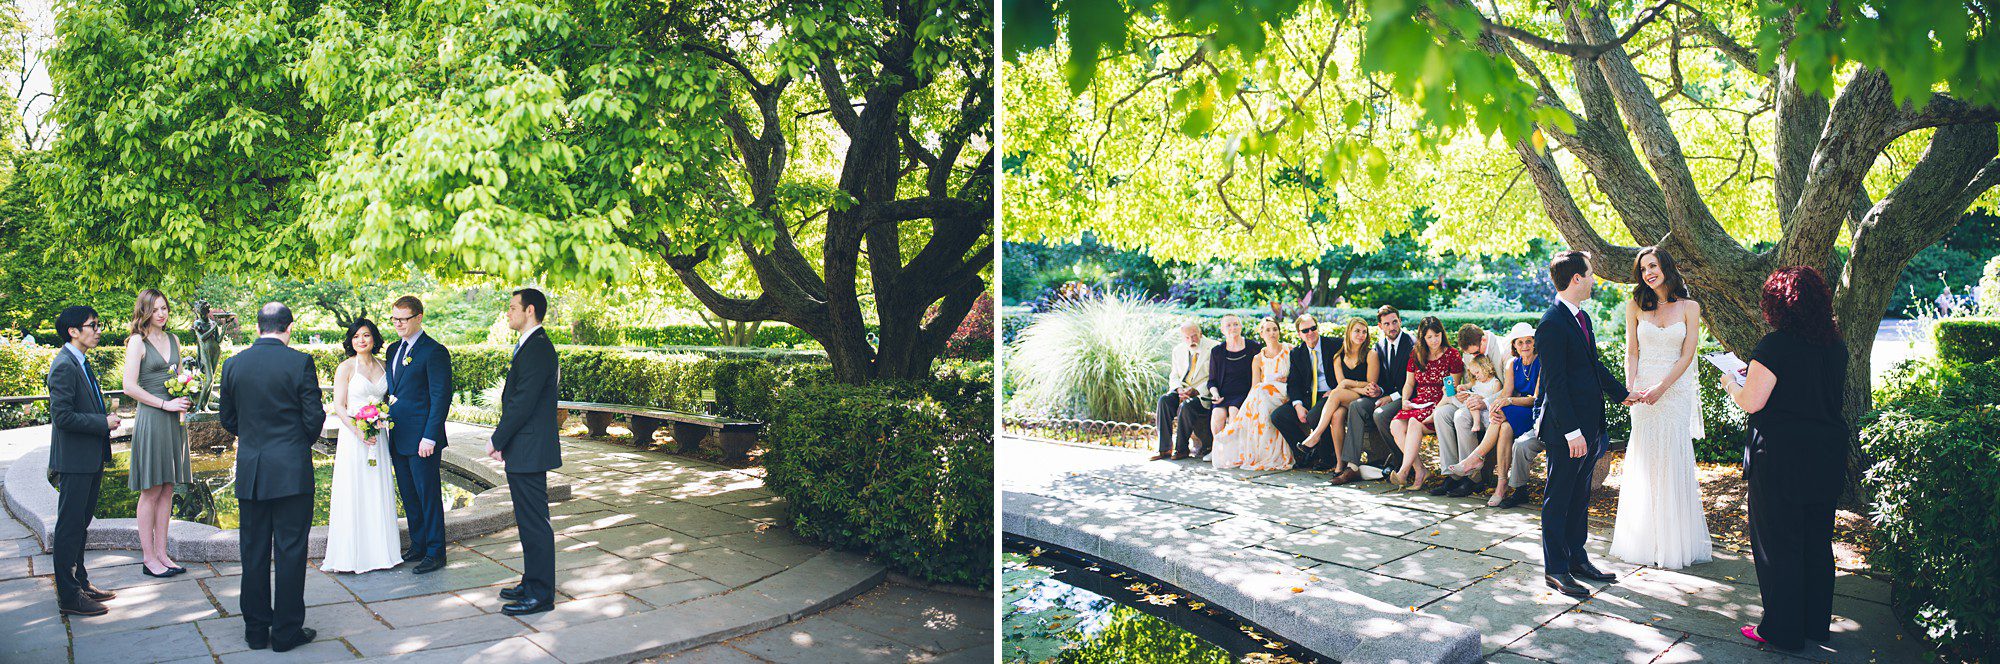 Best places to get married in Central Park Conservatory Garden